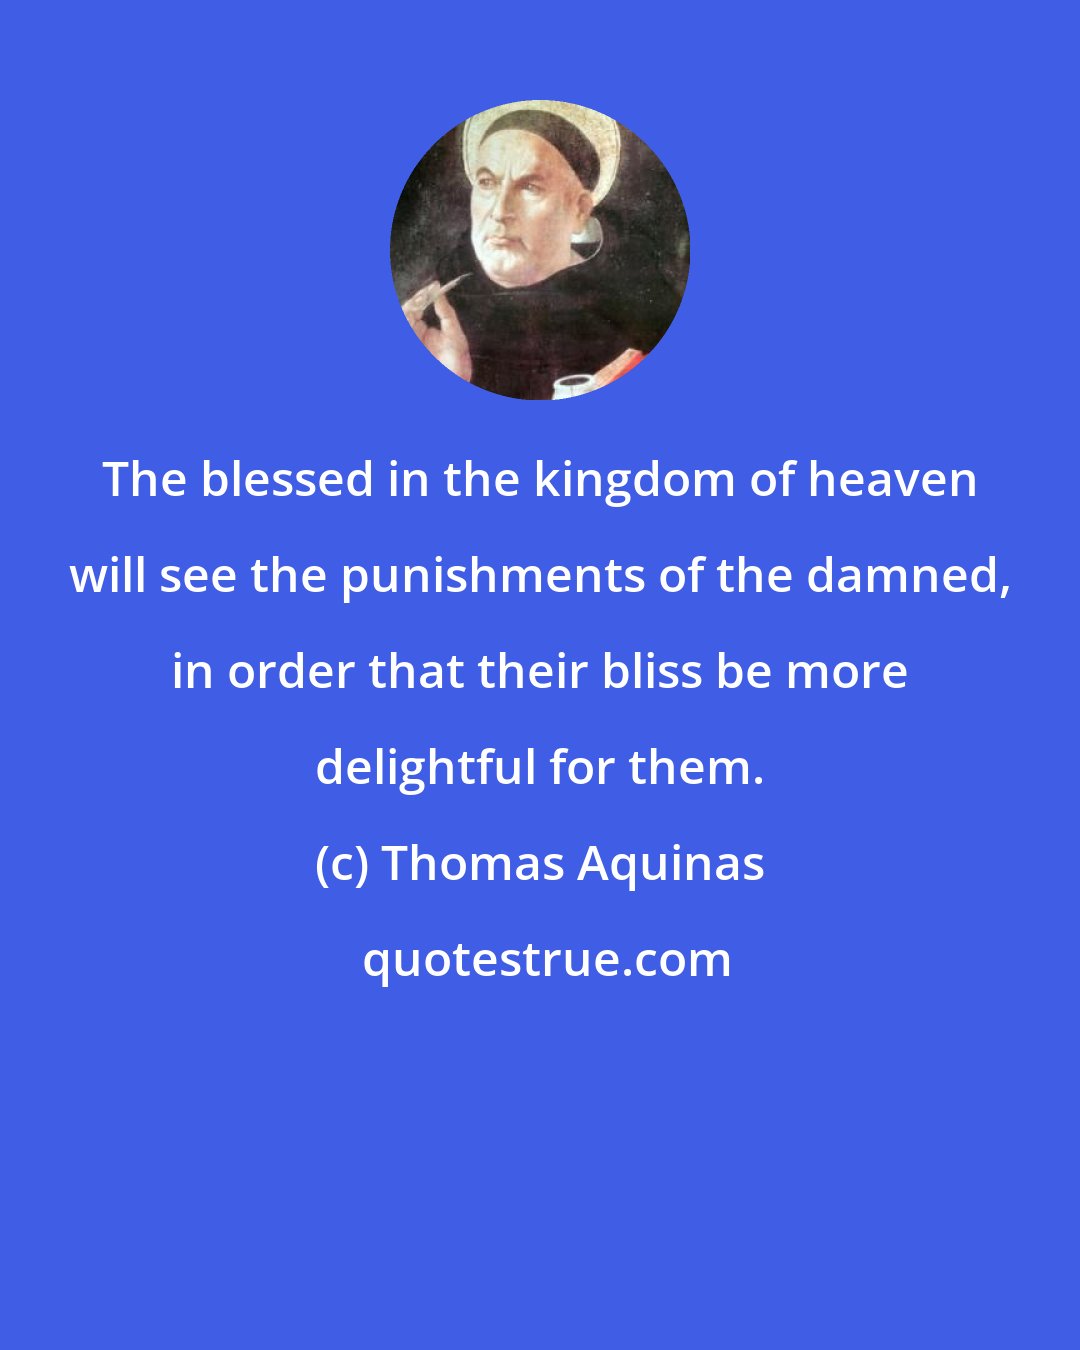 Thomas Aquinas: The blessed in the kingdom of heaven will see the punishments of the damned, in order that their bliss be more delightful for them.